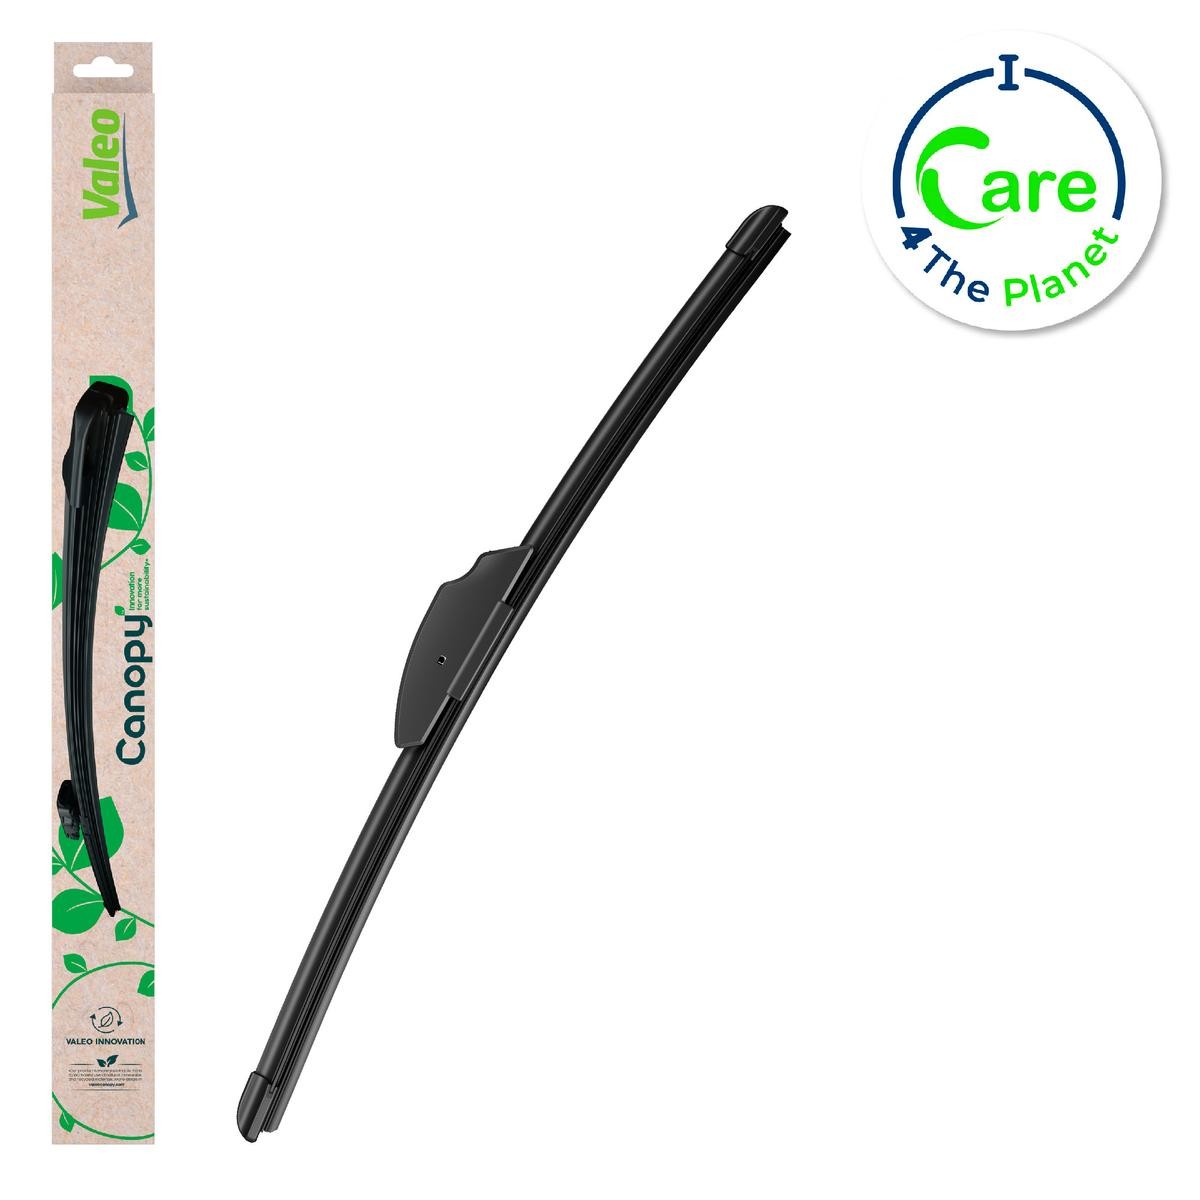 CAN04 VALEO CANOPY 400 mm, Flat wiper blade, Rubber wiper from >80 % sustainable materials, with spoiler, 16 Inch Styling: with spoiler Wiper blades 583904 buy